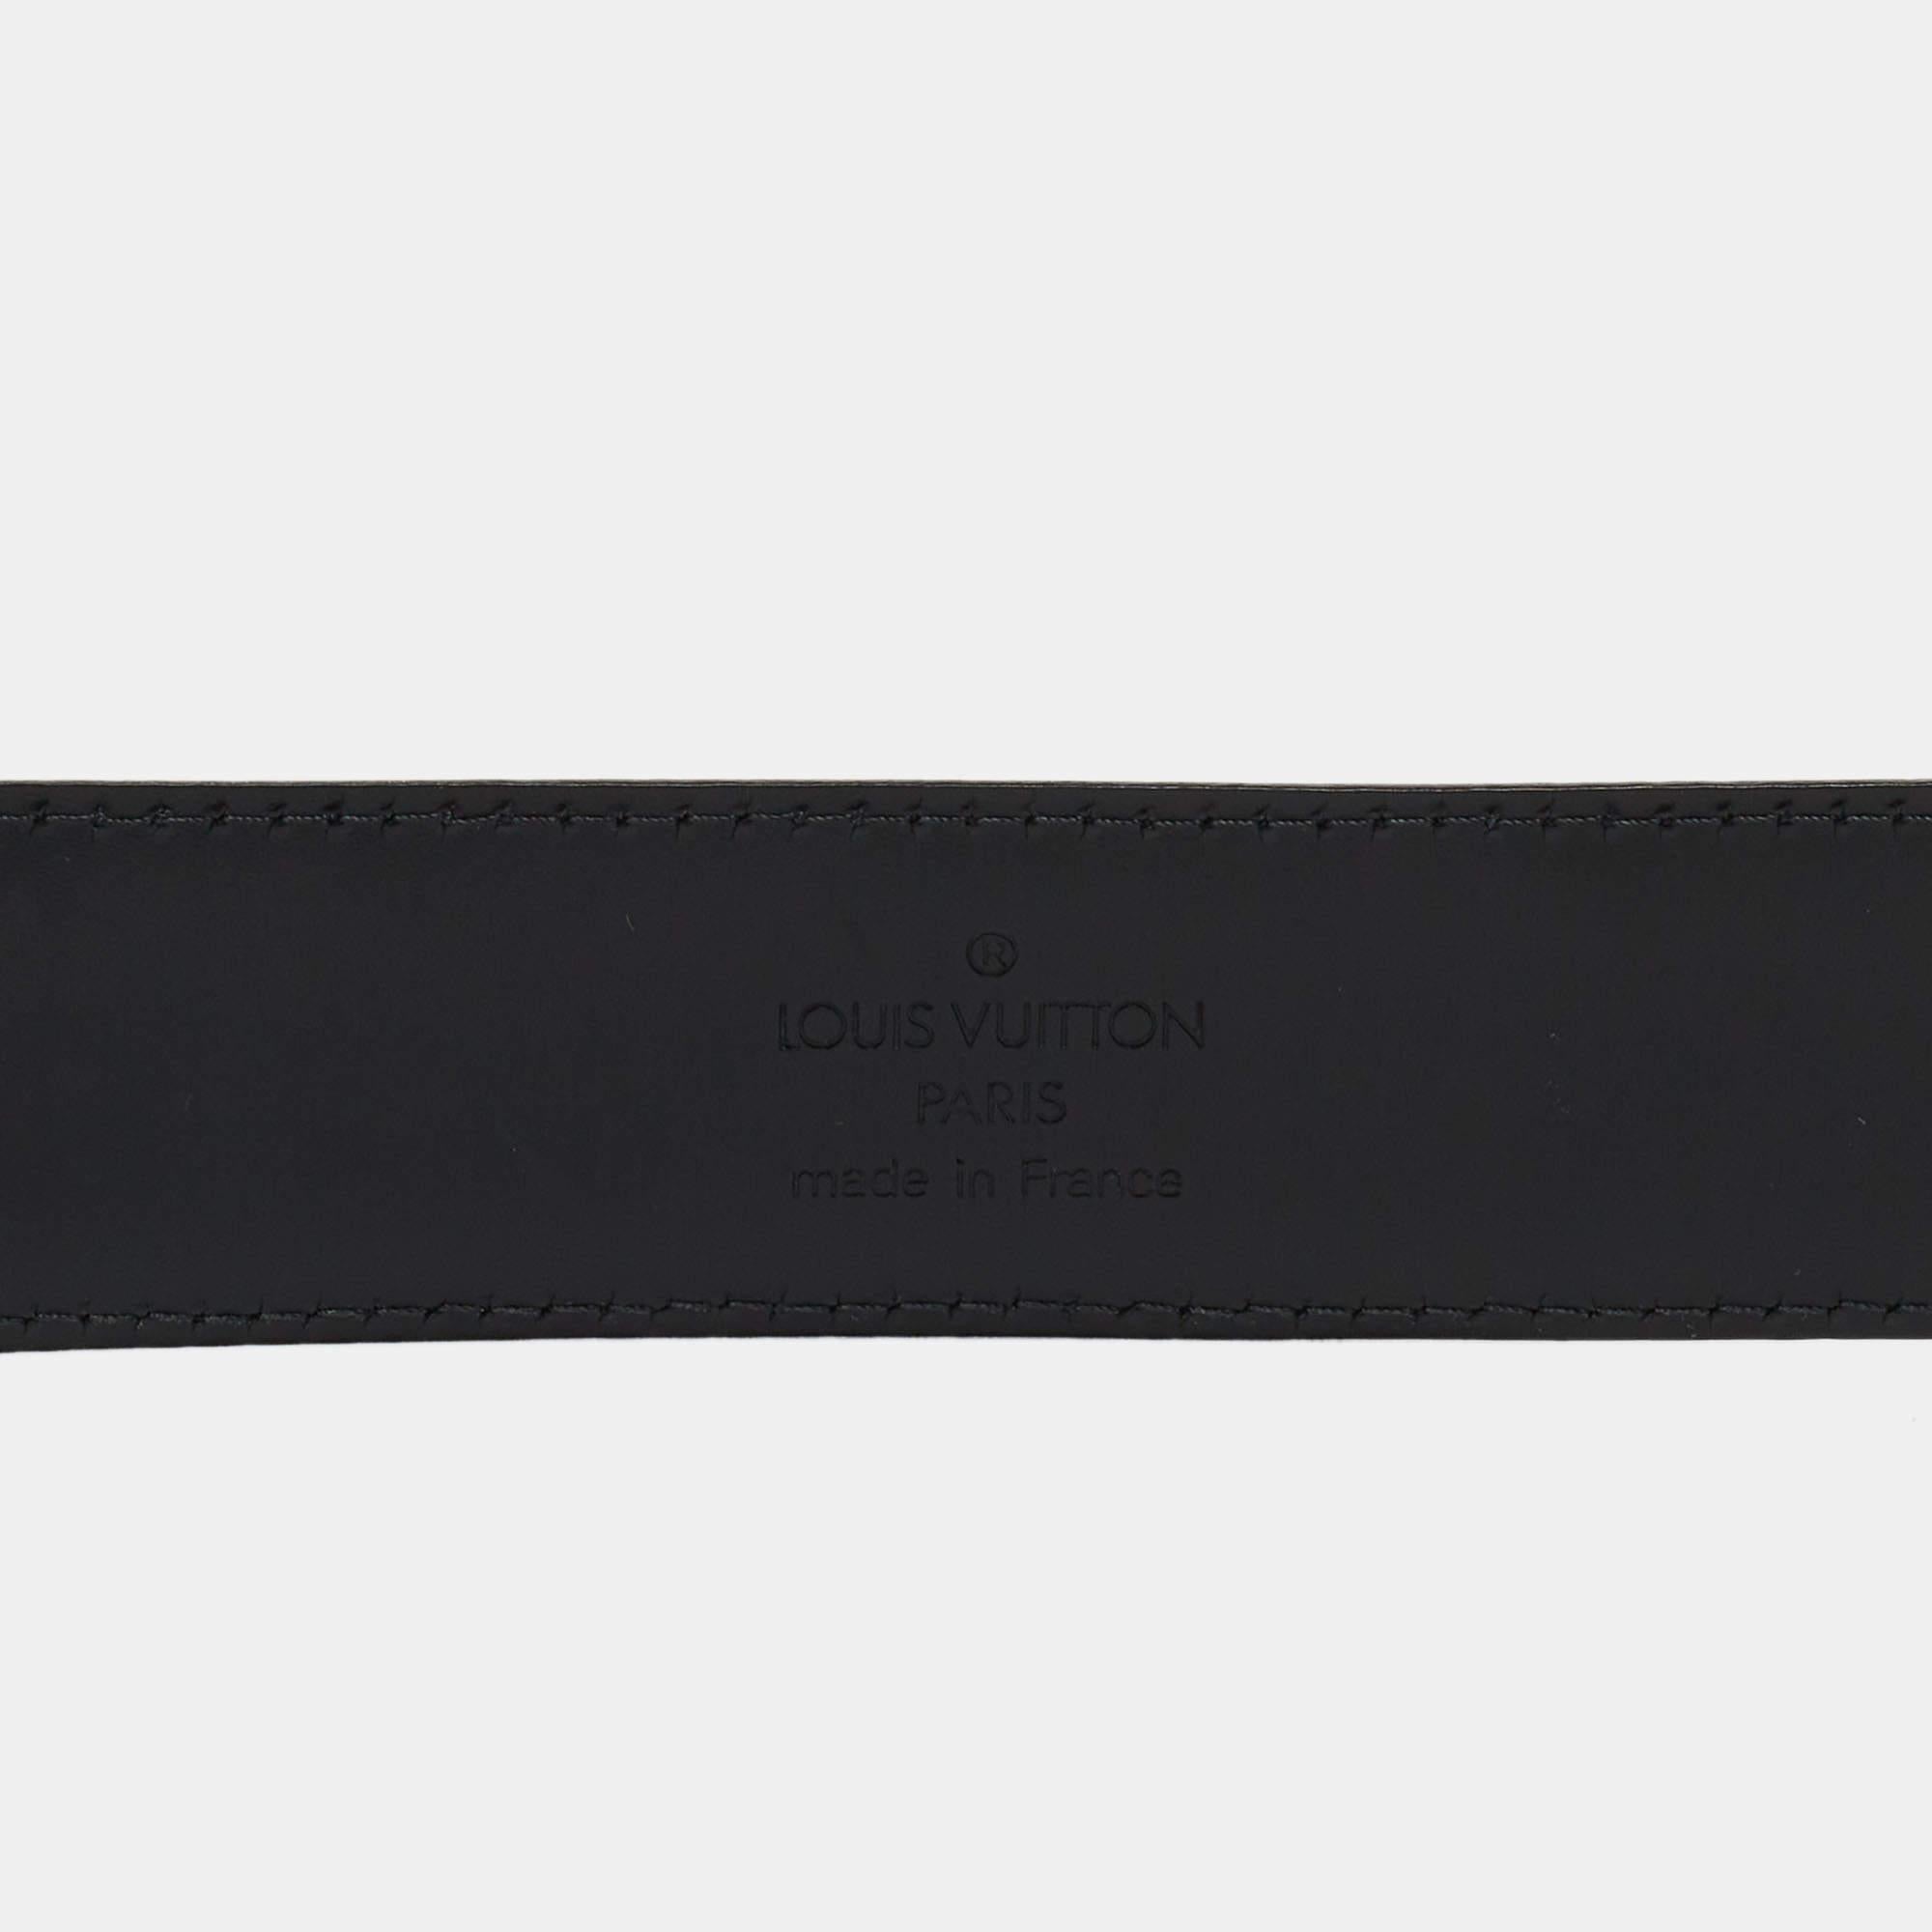 Presenting a pin buckle and loop in silver-tone metal to contrast with the black taiga leather strap, Louis Vuitton's belt is to suit all your refined looks. High in durability and appeal, this belt is a fine element of luxury.

Includes: Original